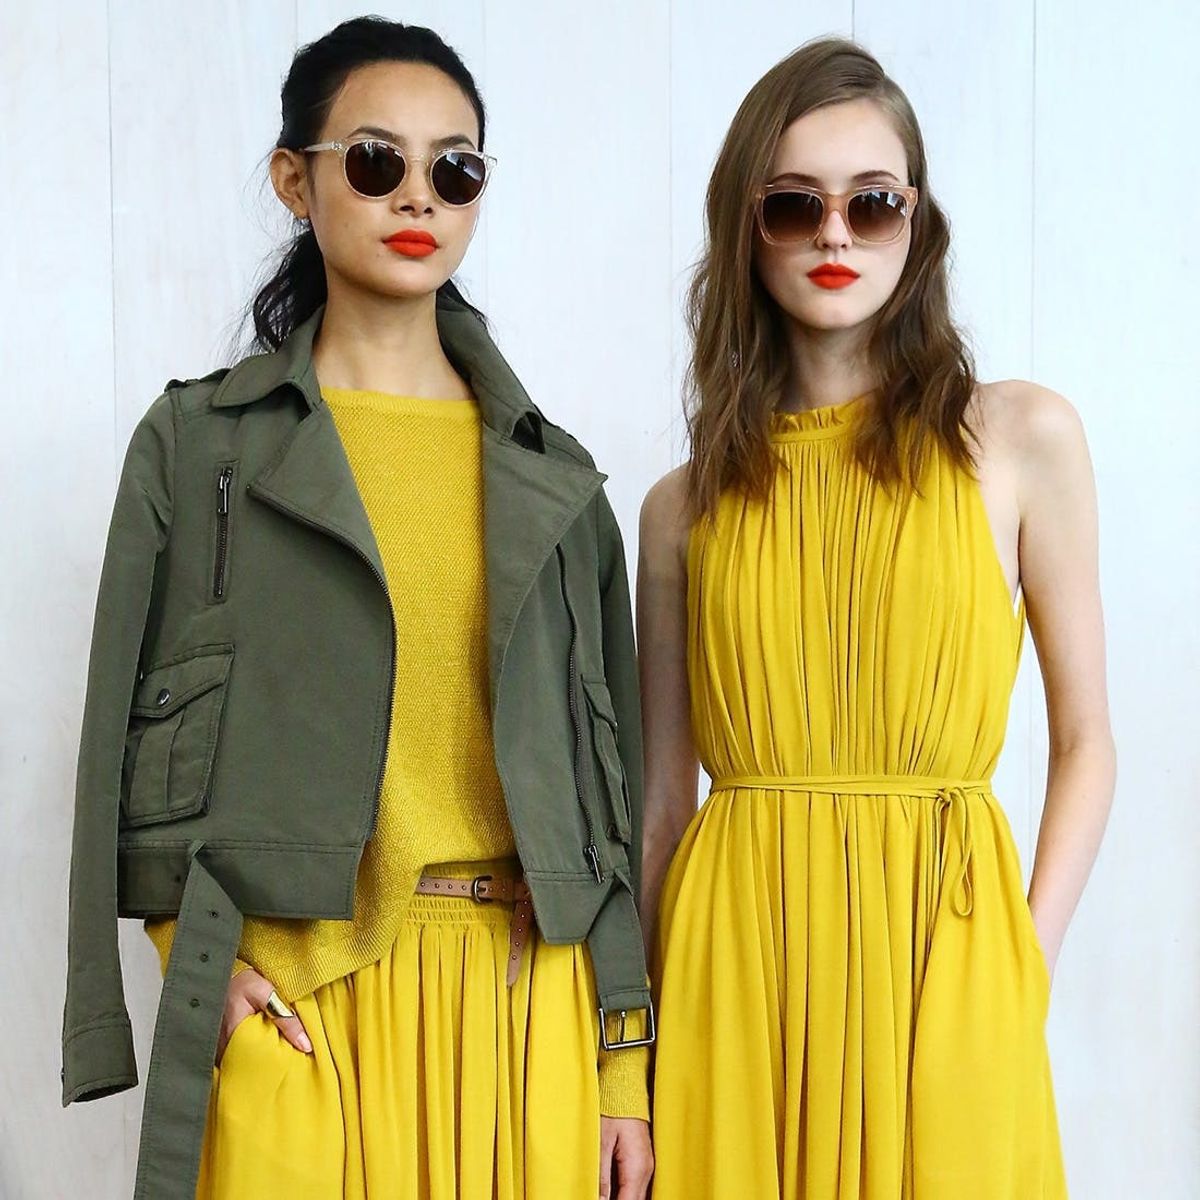 Banana Republic’s New Collab Is Amazing News for Up and Coming Designers